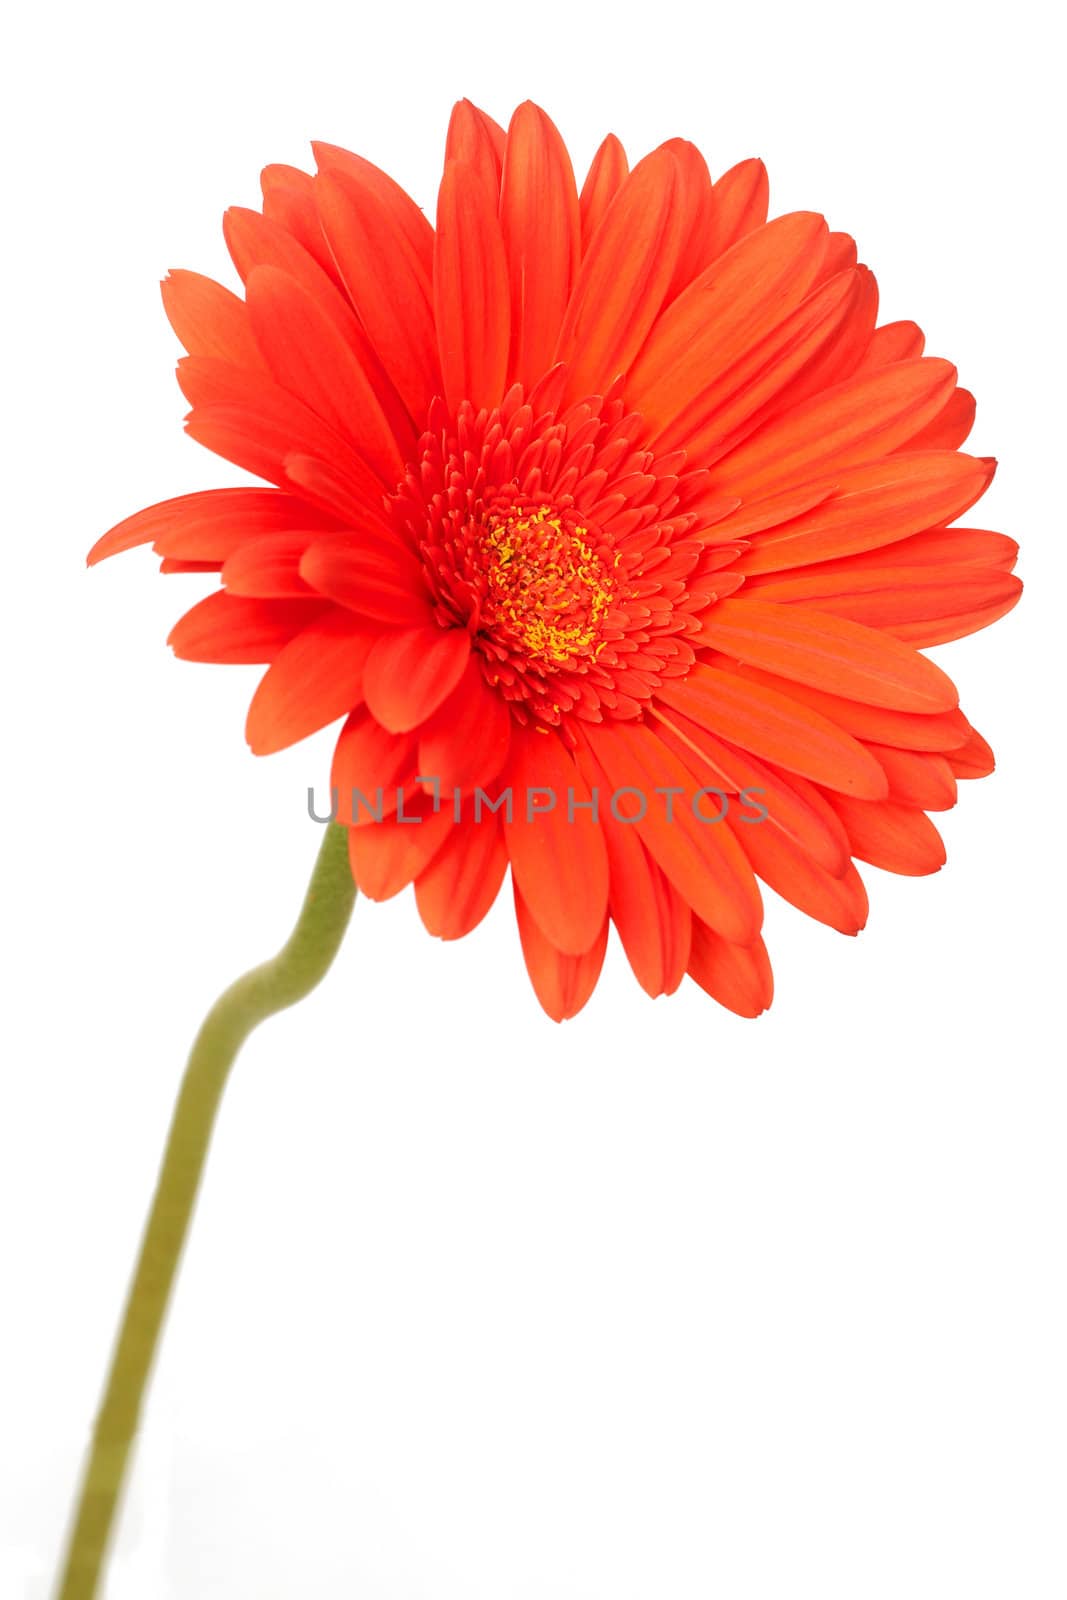 Red gerber daisy on white background. Shallow depth of field